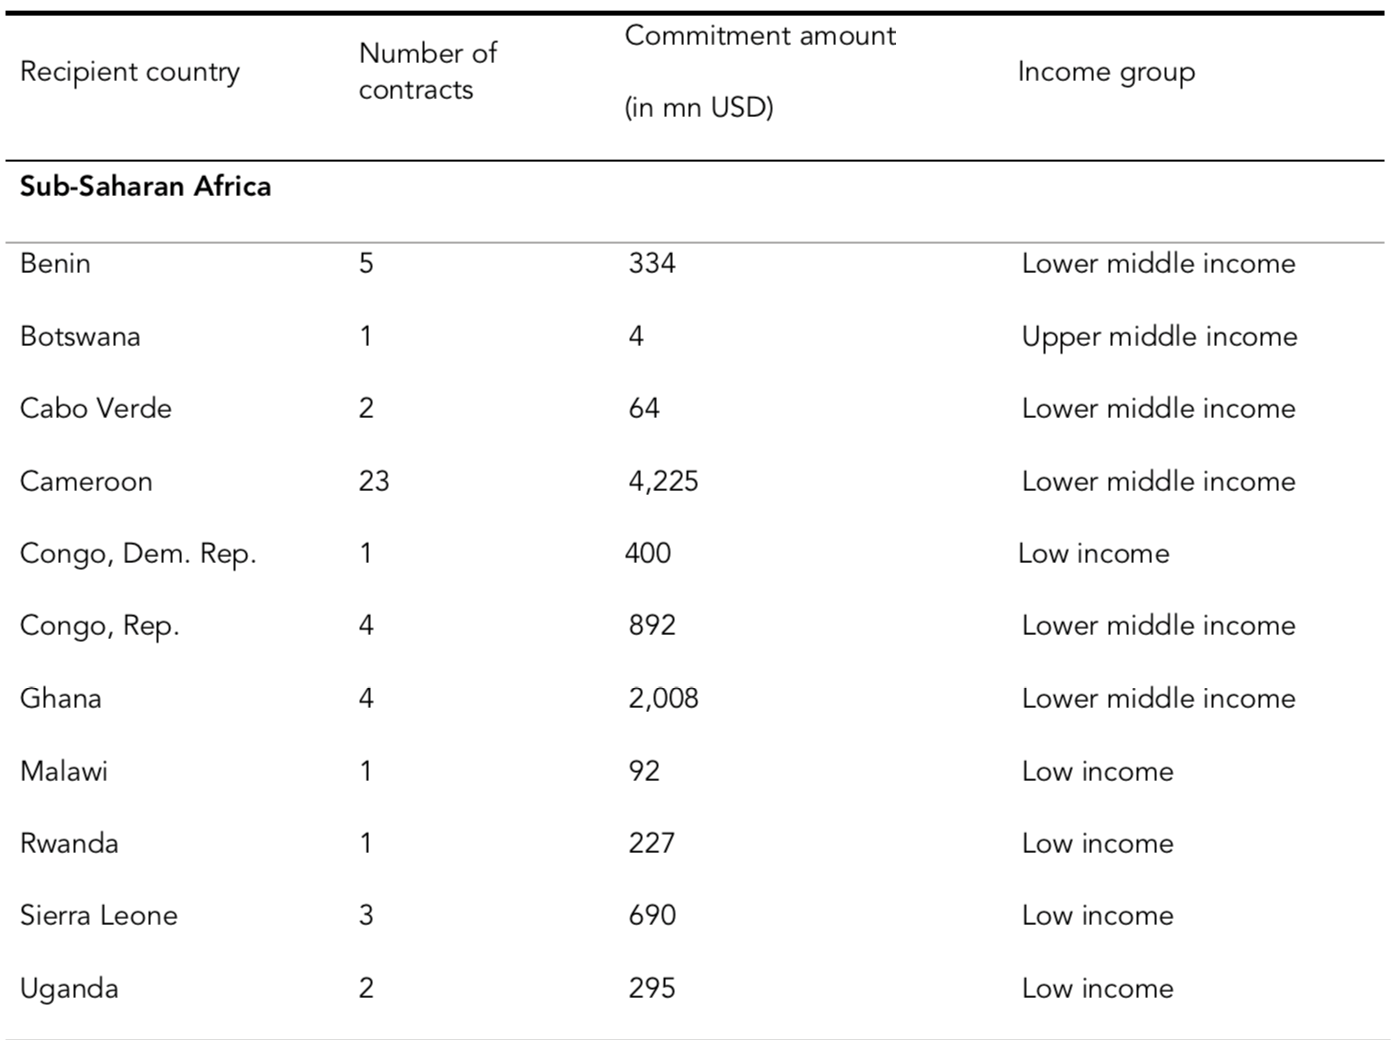 Figure 1. Breakdown of China-Africa Debt Contracts represented in the study